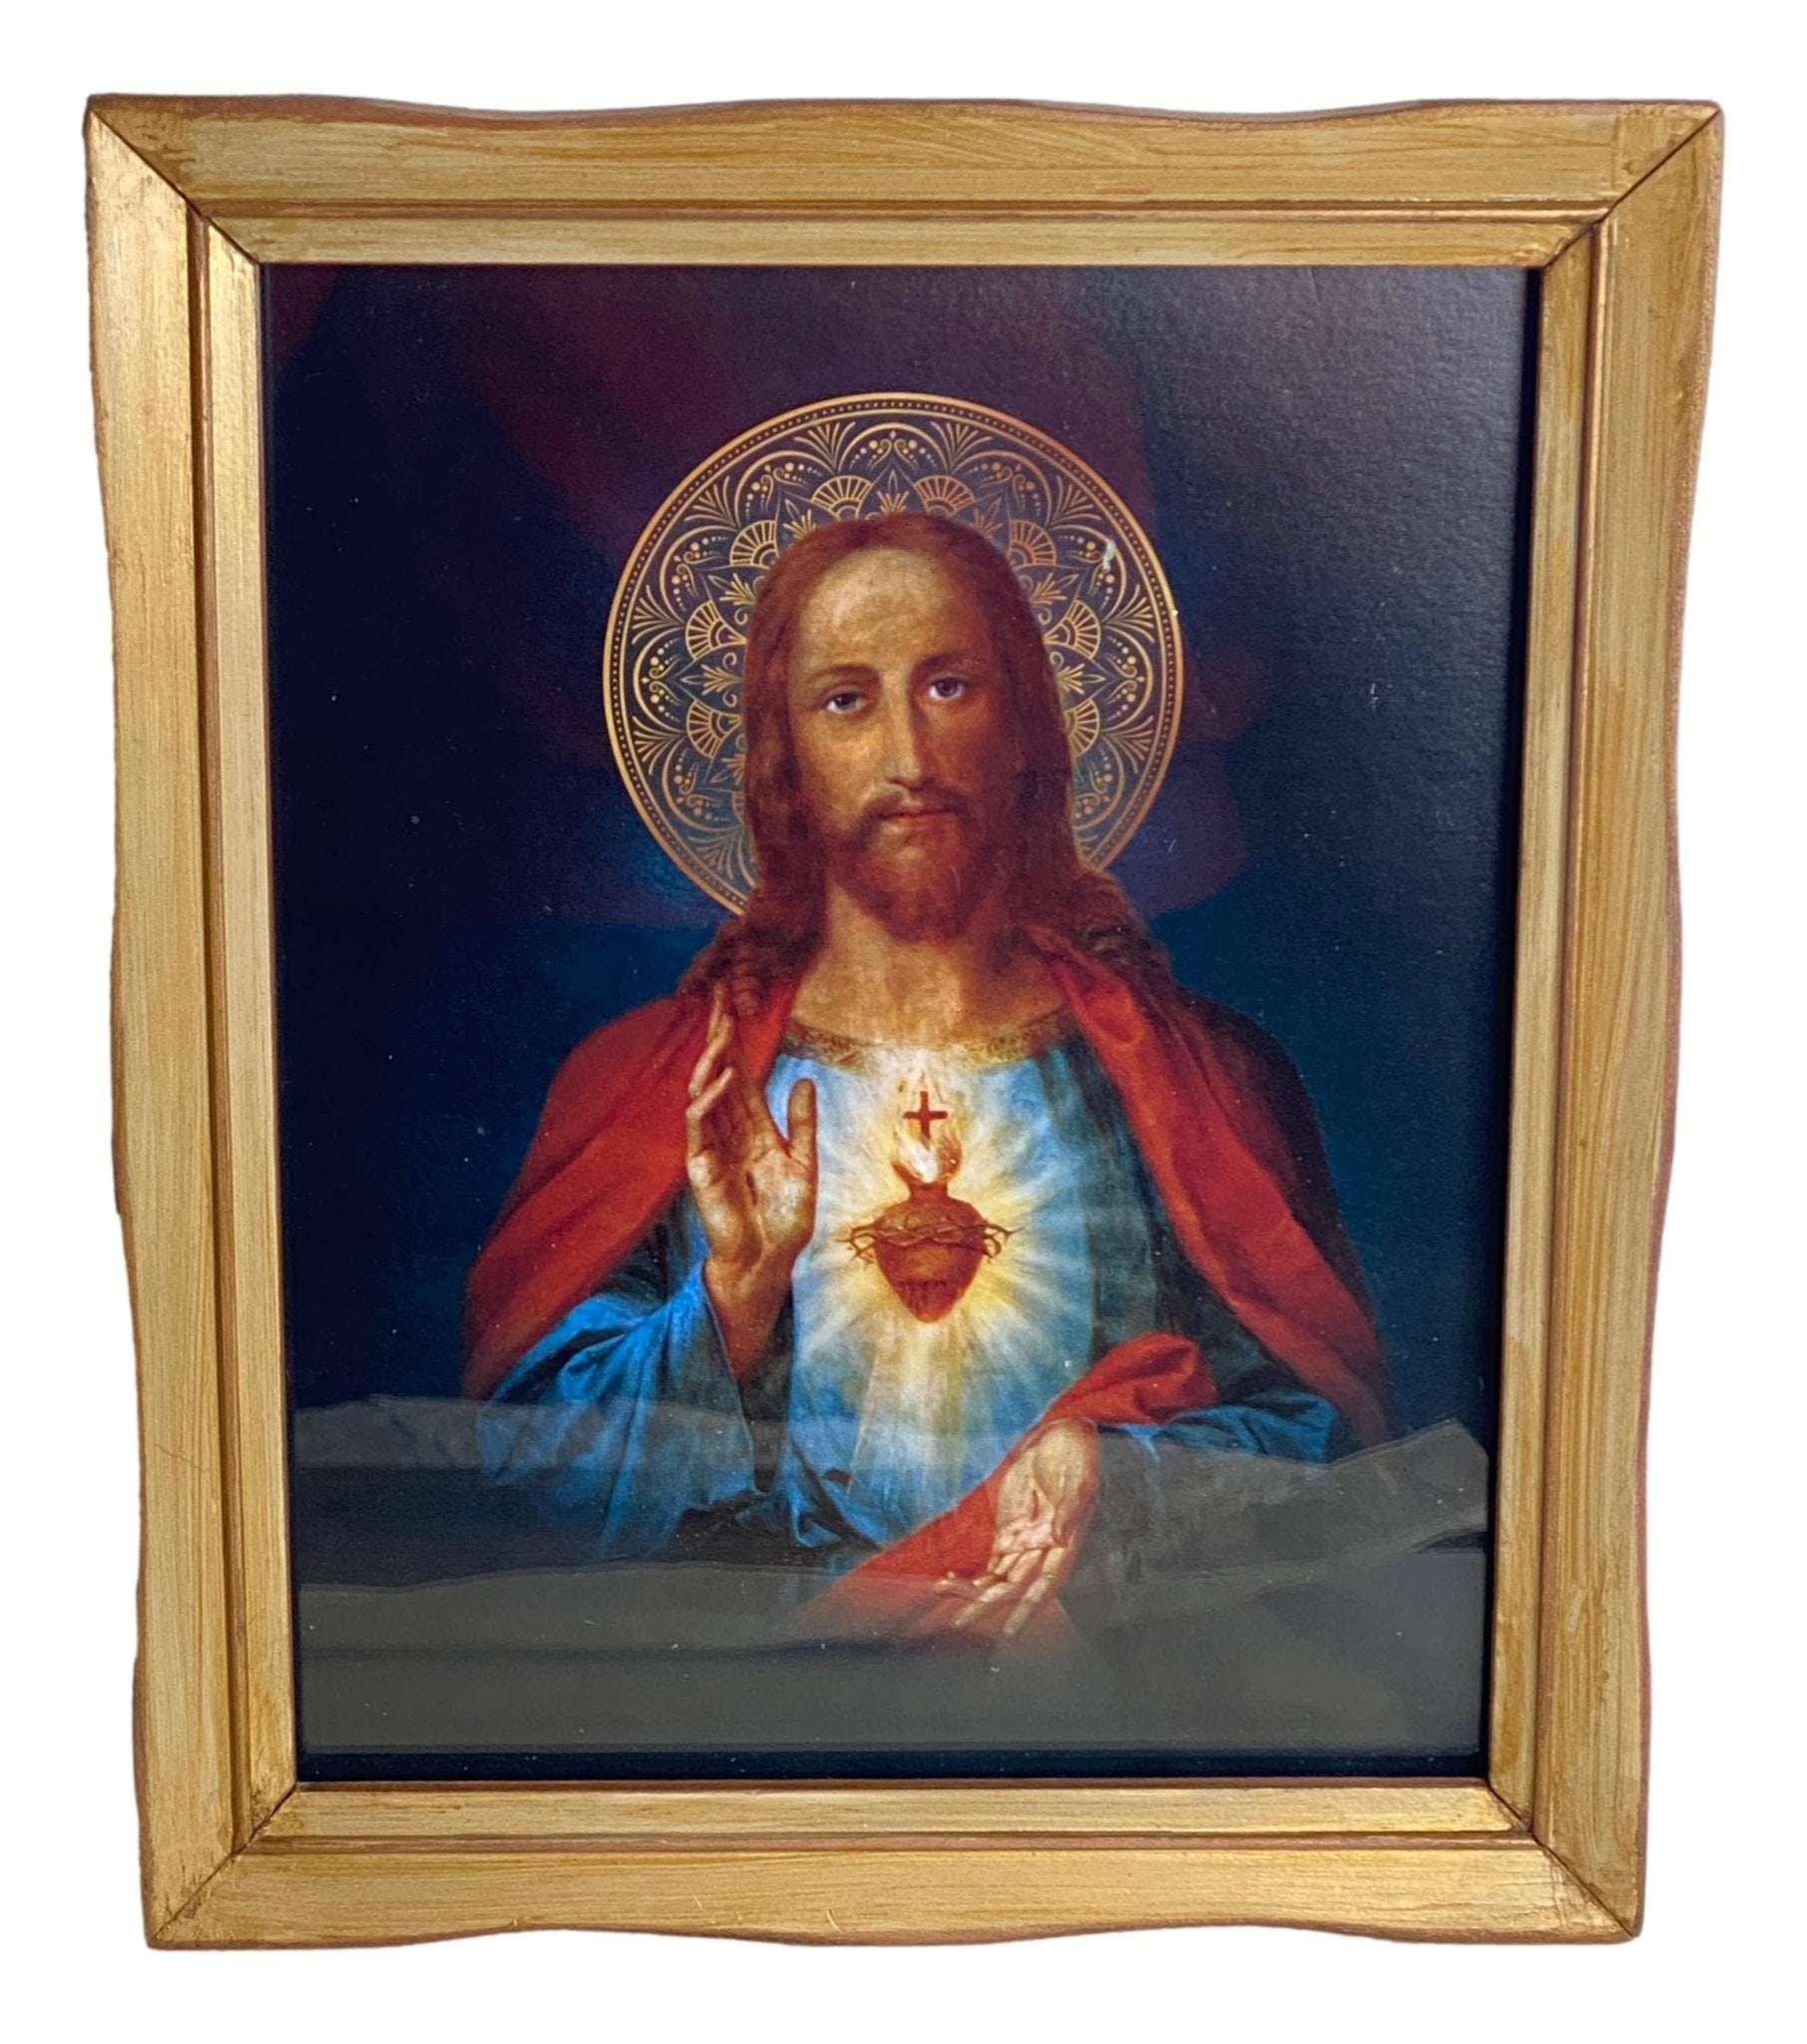 Frame Wood Sacred Heart Color Print Handcrafted by Local Artisan 9 1/2 L x 3/4 W x 11 1/2 H Inches - Ysleta Mission Gift Shop- VOTED 2022 El Paso's Best Gift Shop